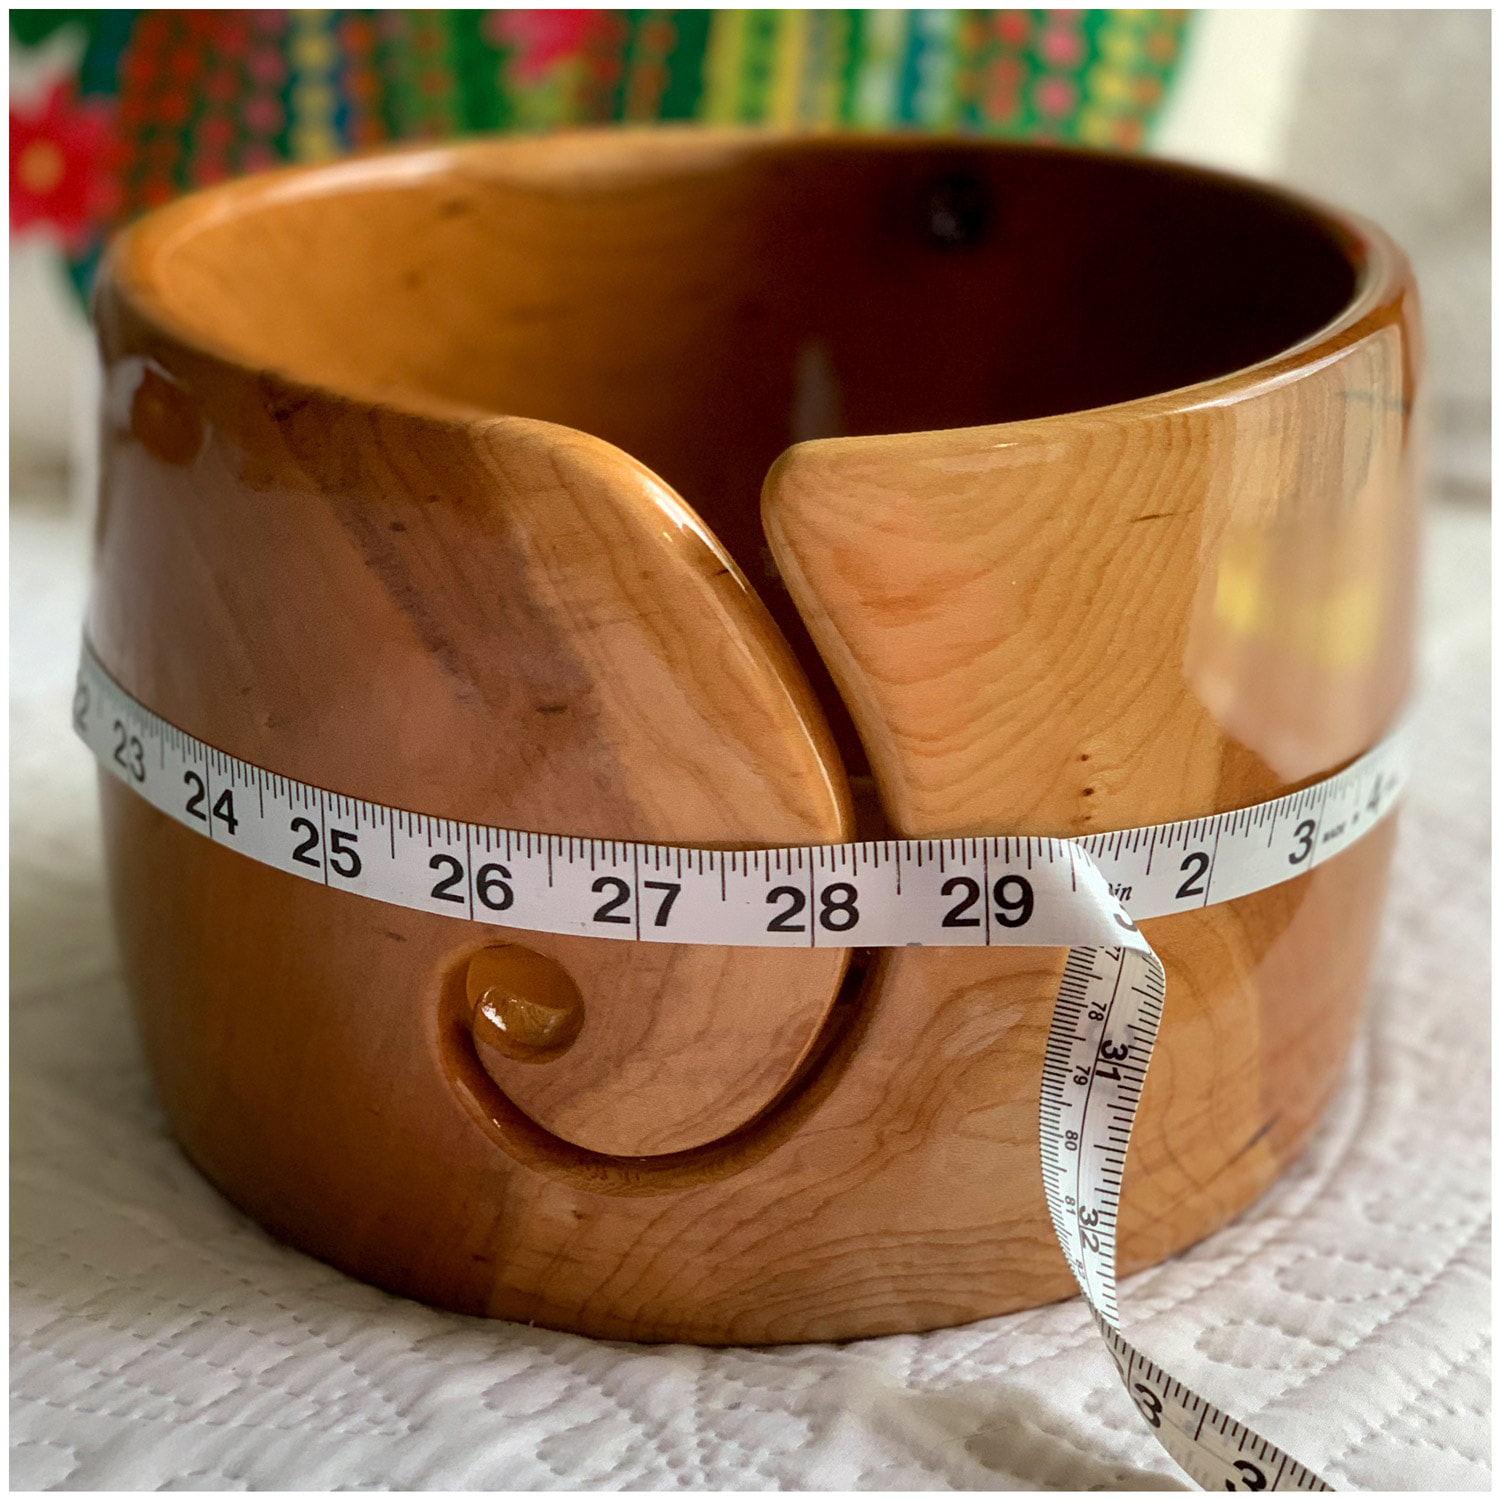 XXXL Yarn Bowl, Cherry Harwood, GIANT! For Knitting, Crochet, Yarning,  Sparkle Inlay One-of-a-kind, Signed #1149